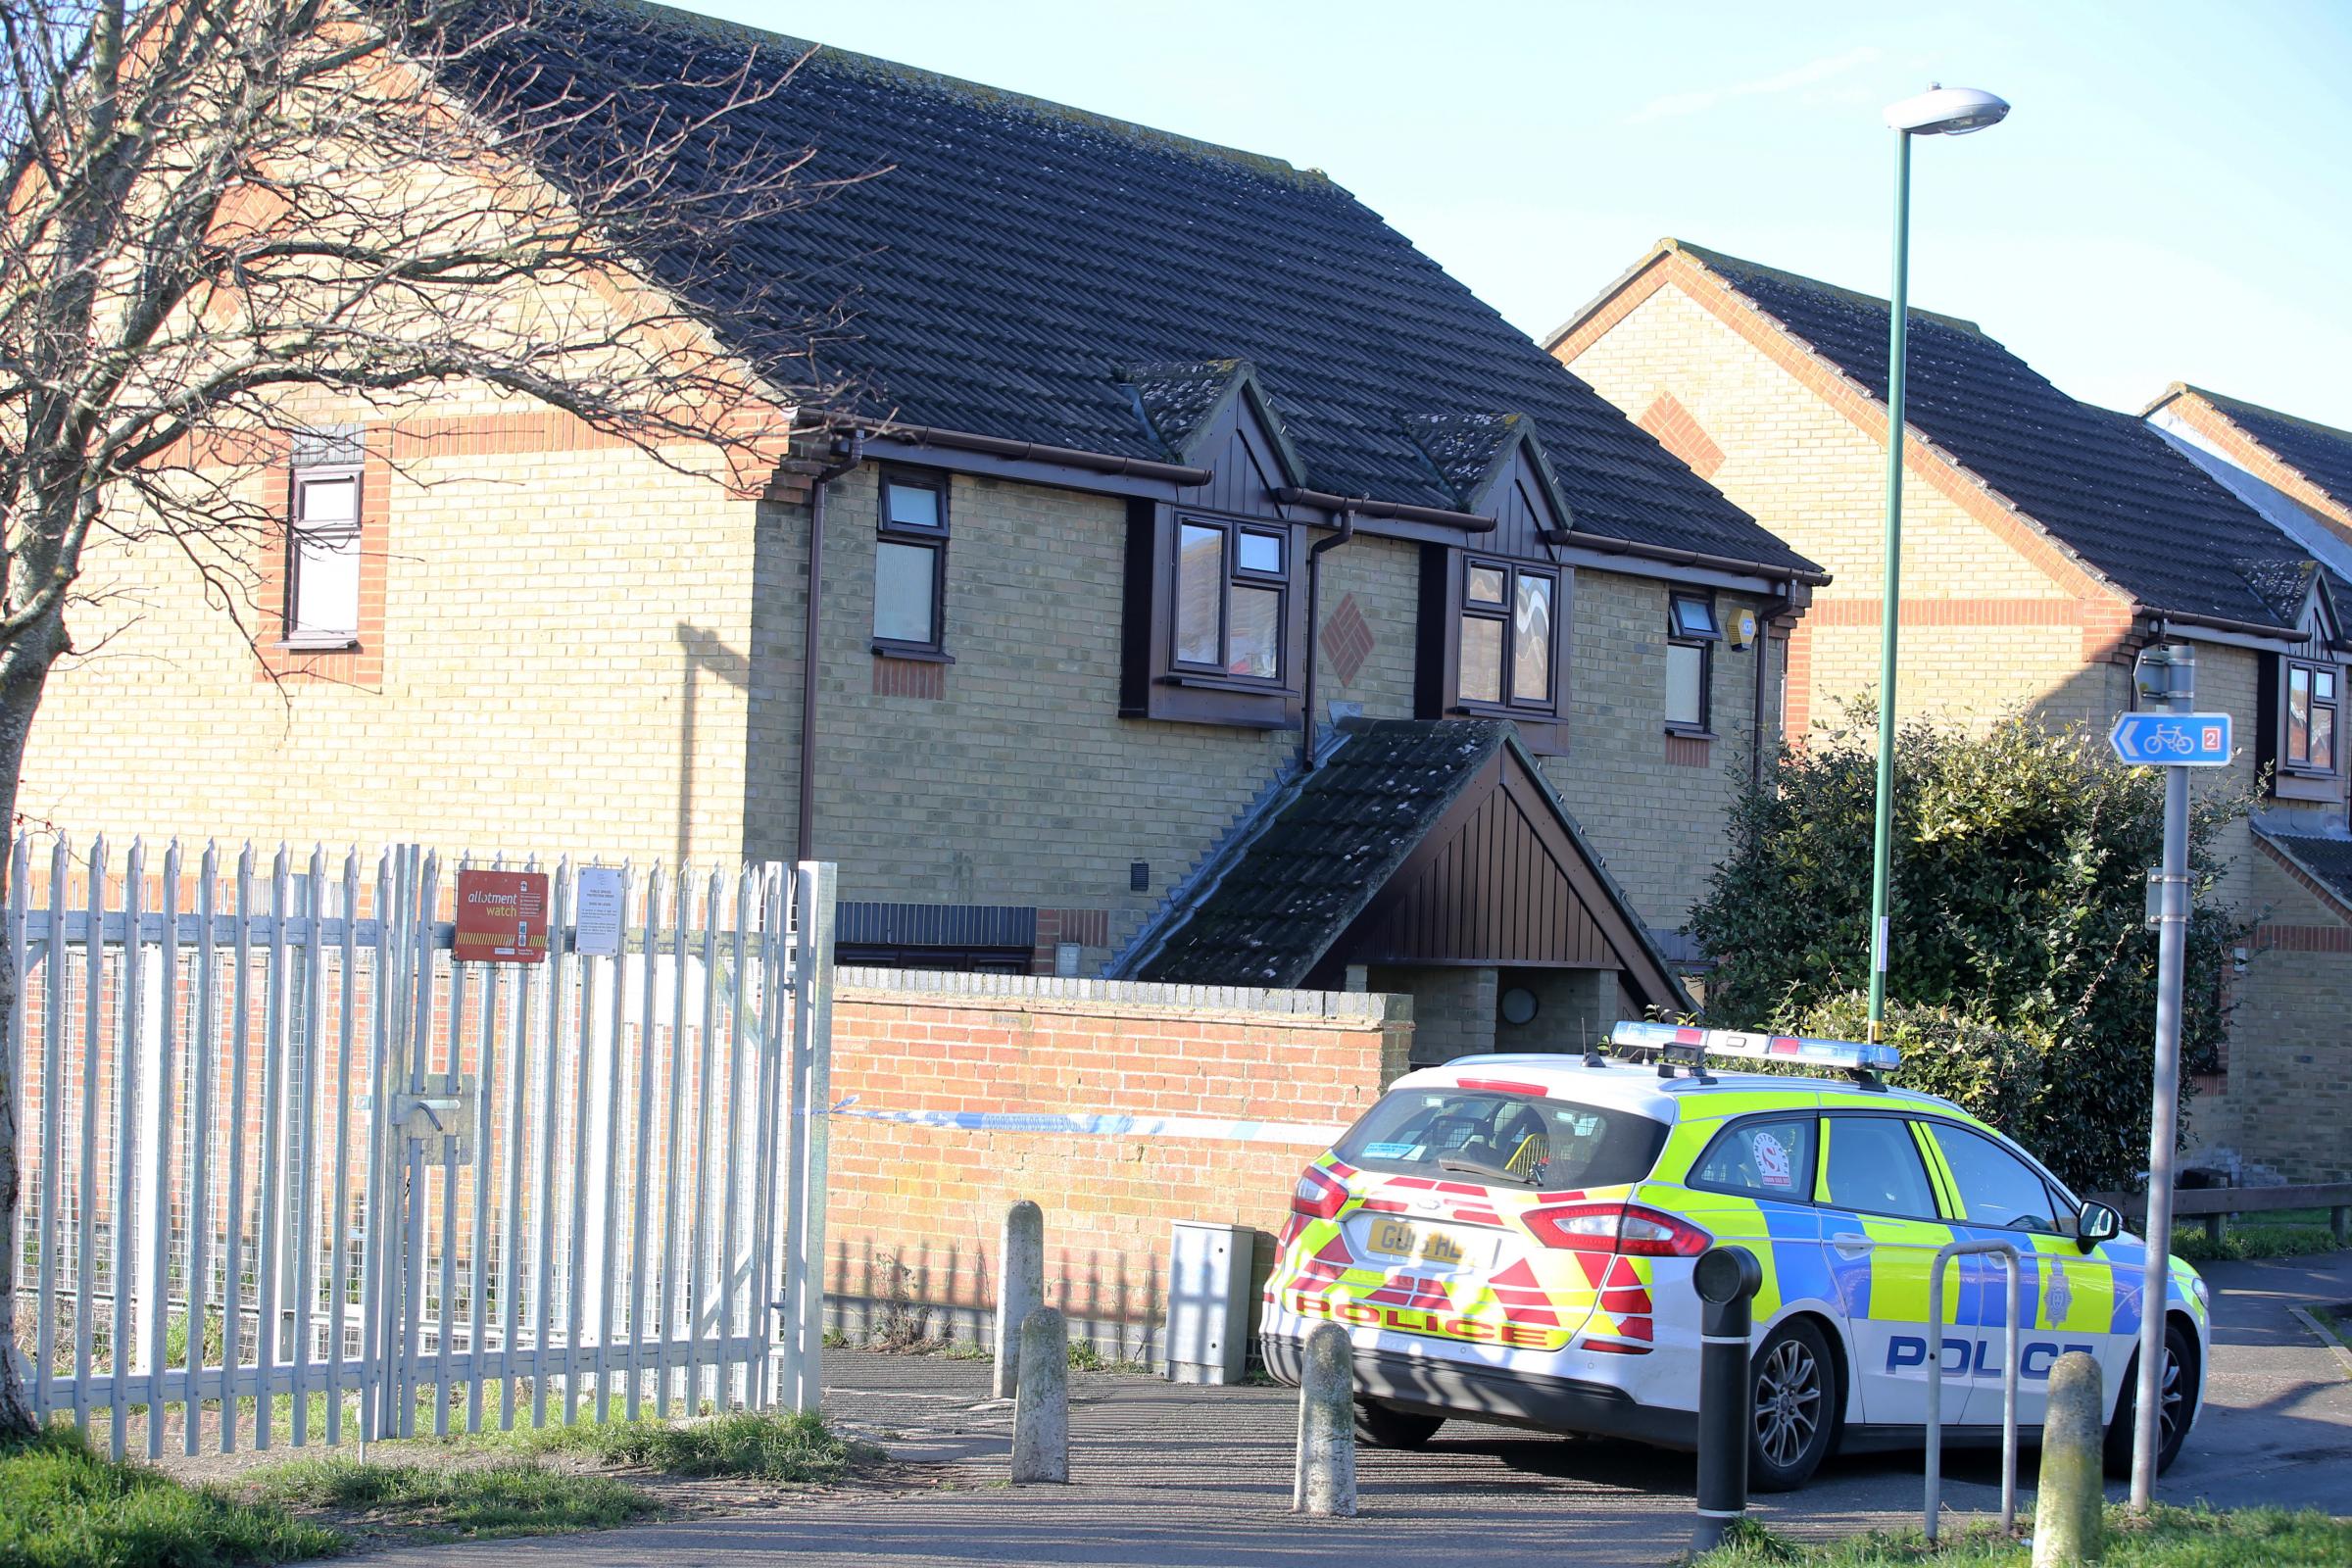 The scene in Nicolson Drive after the incident